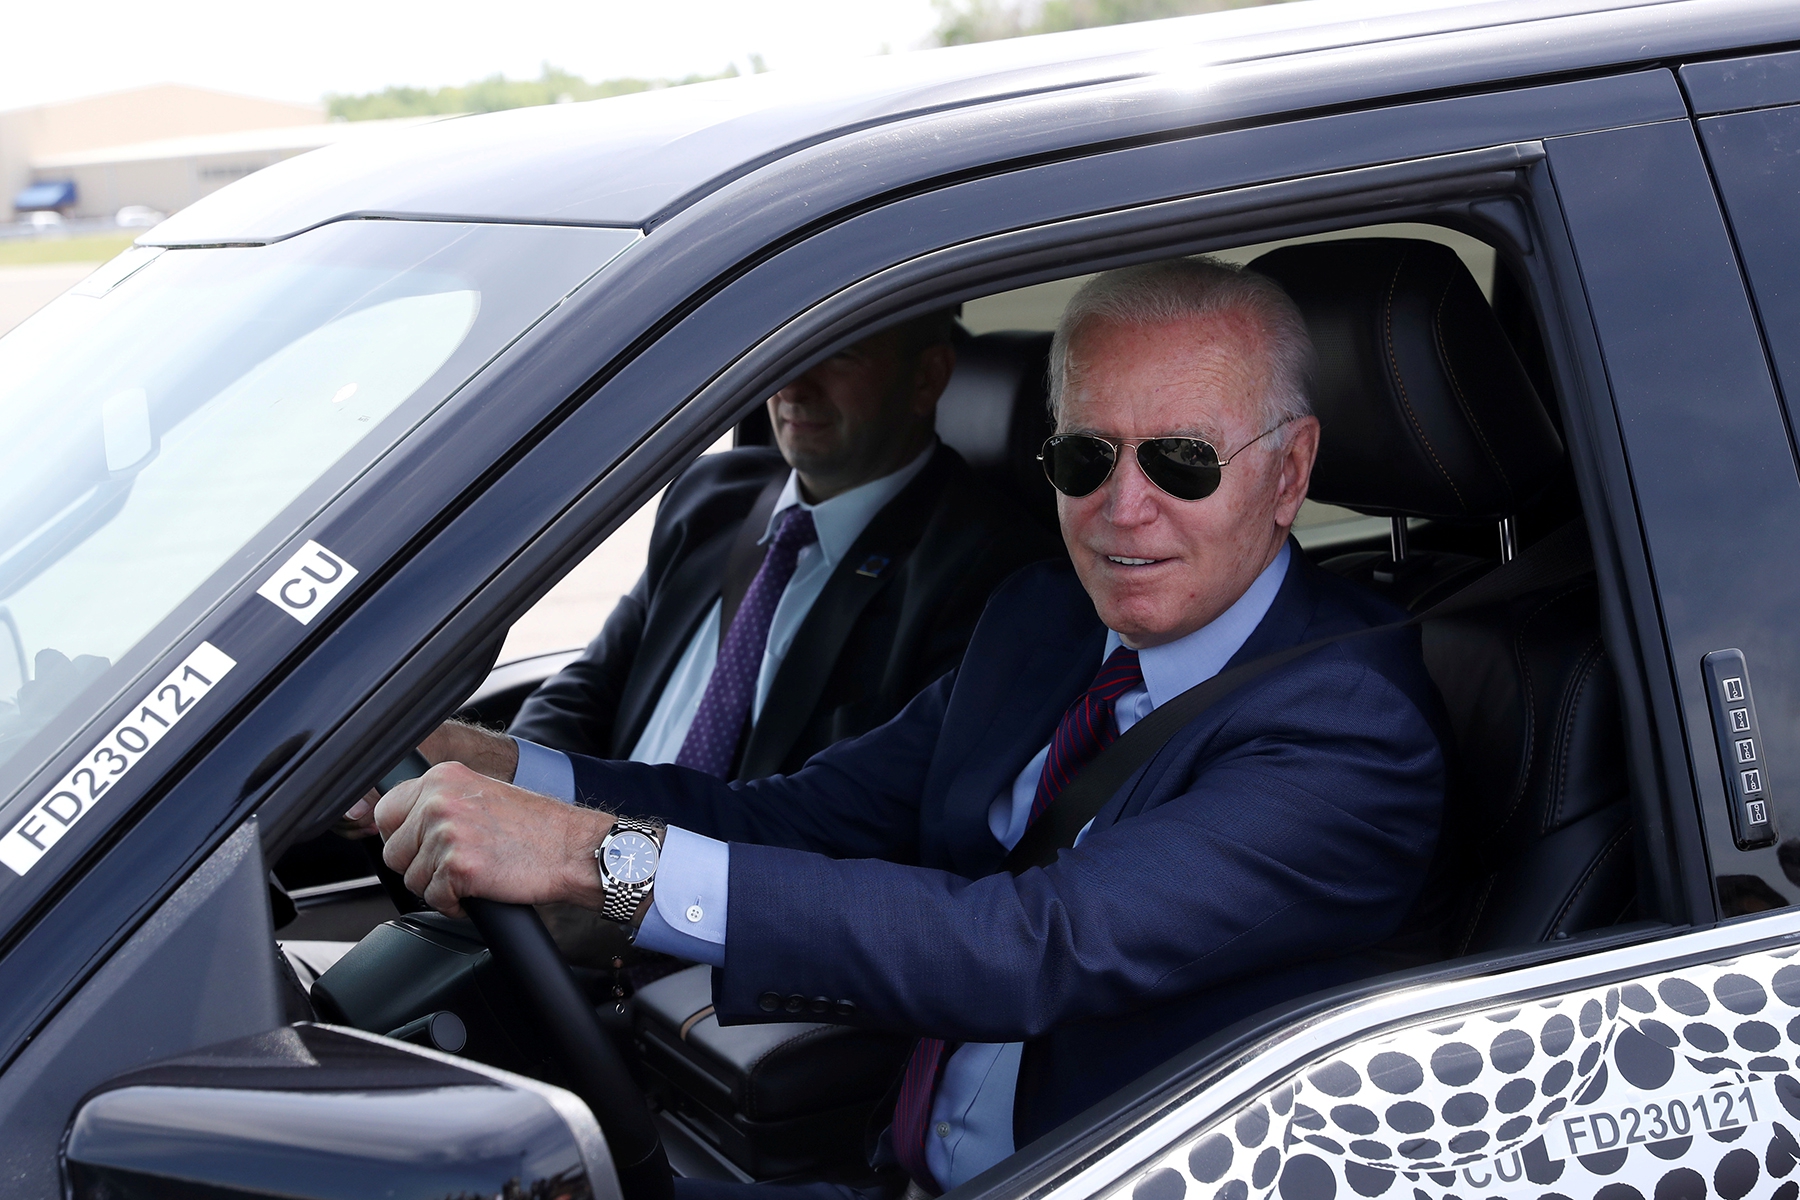 Biden Tests a New Electric Car at a Plant in Michigan